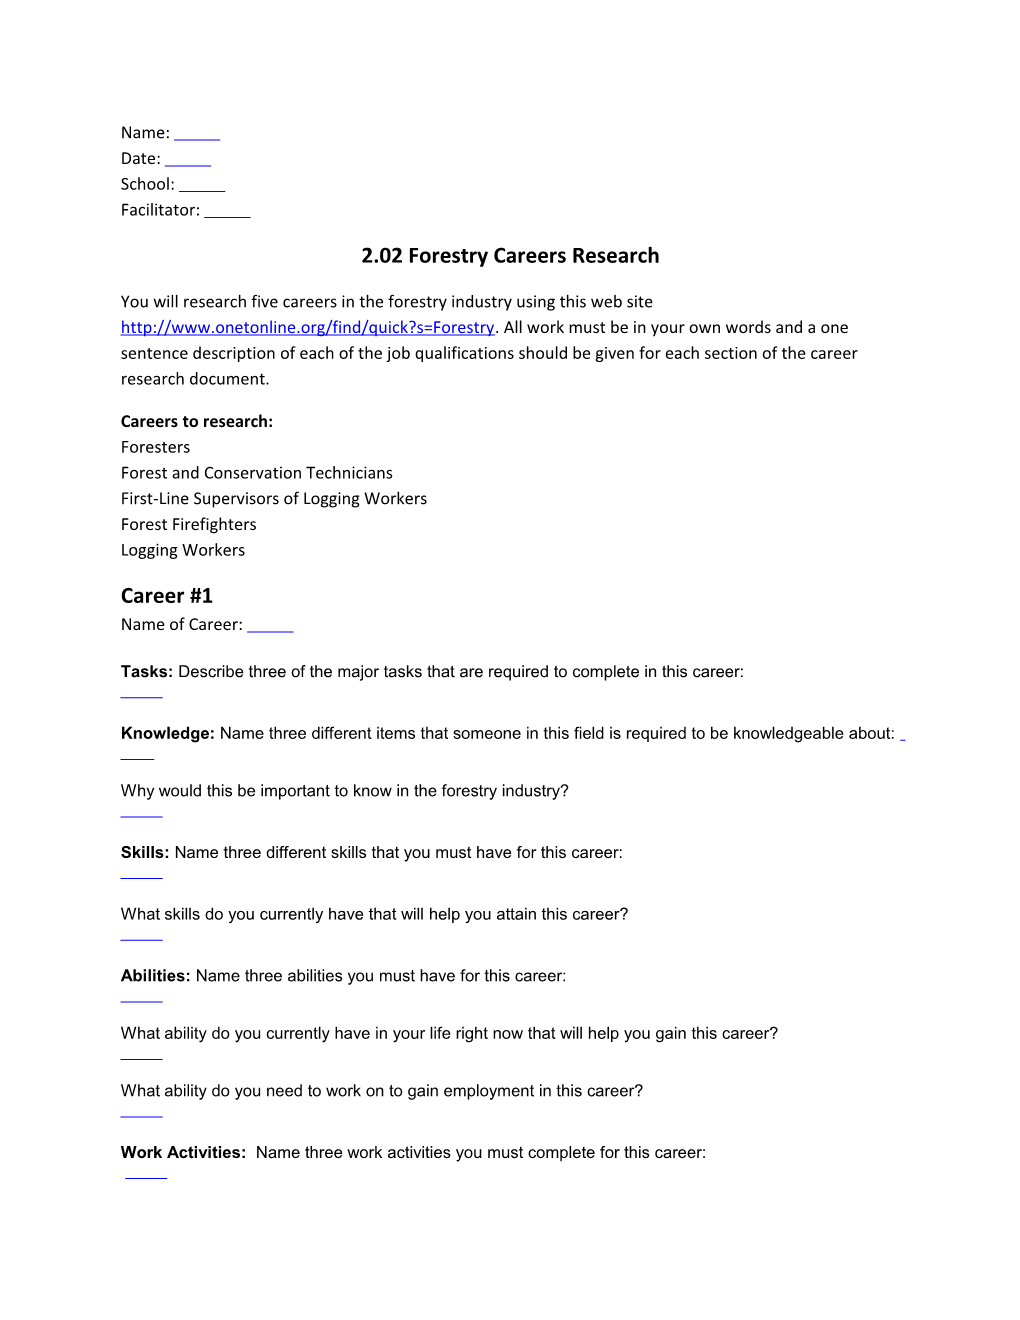 2.02 Forestry Careers Research